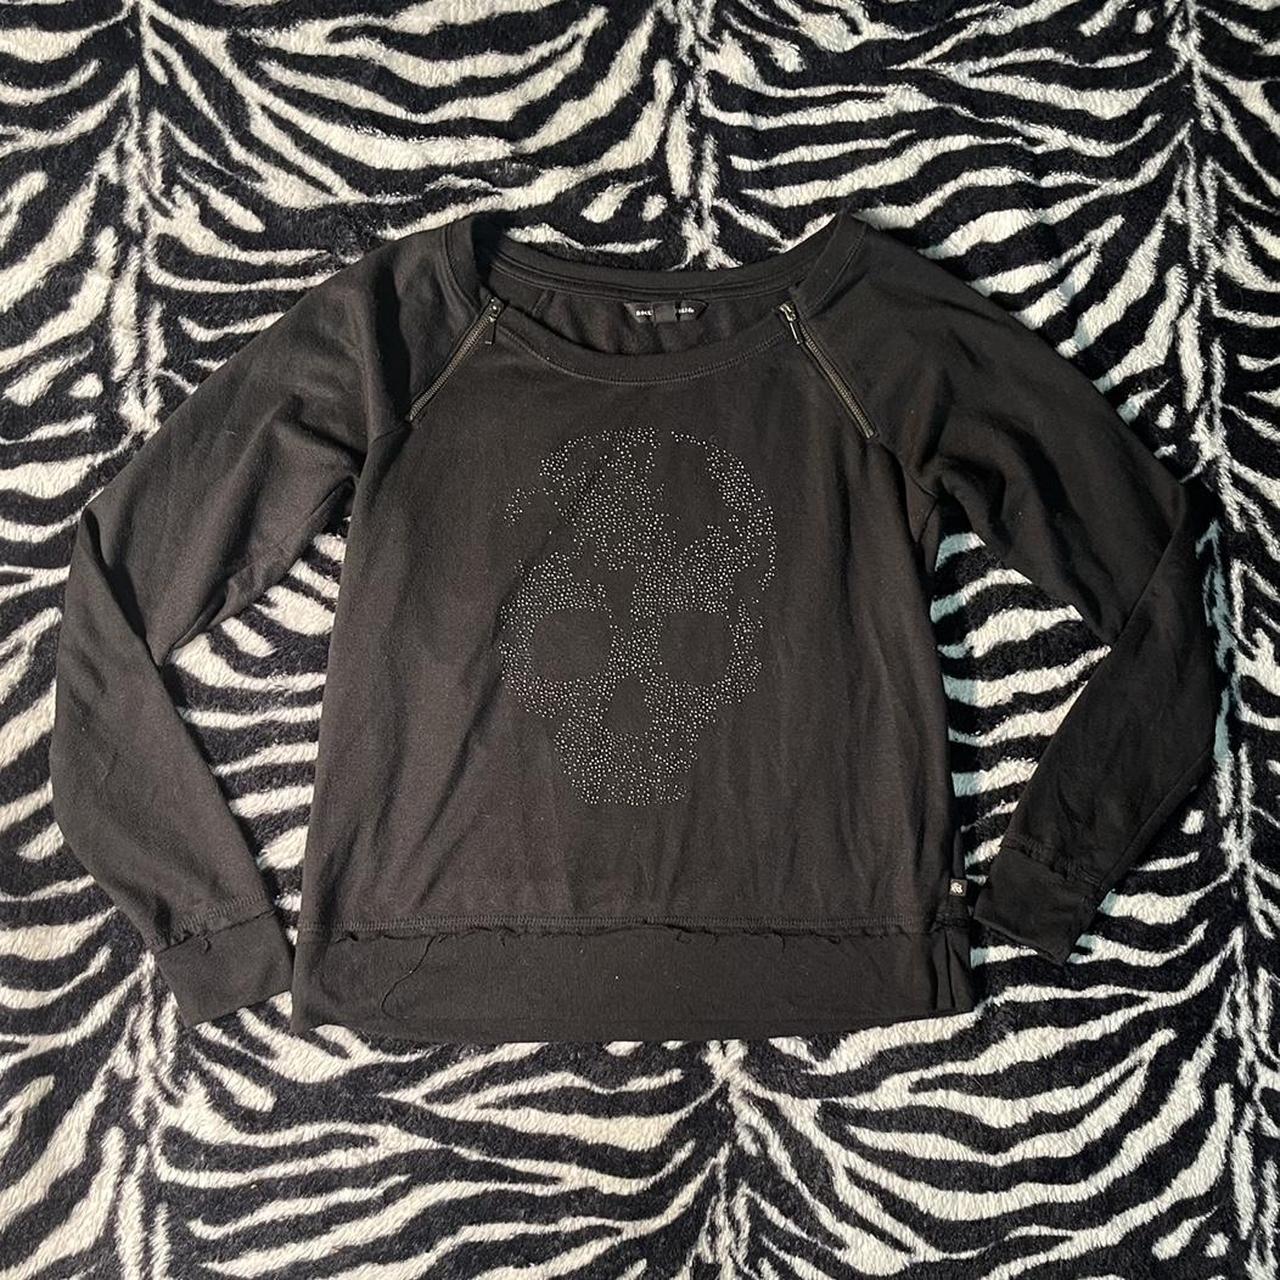 Rock and Republic Women's Black and Grey Shirt